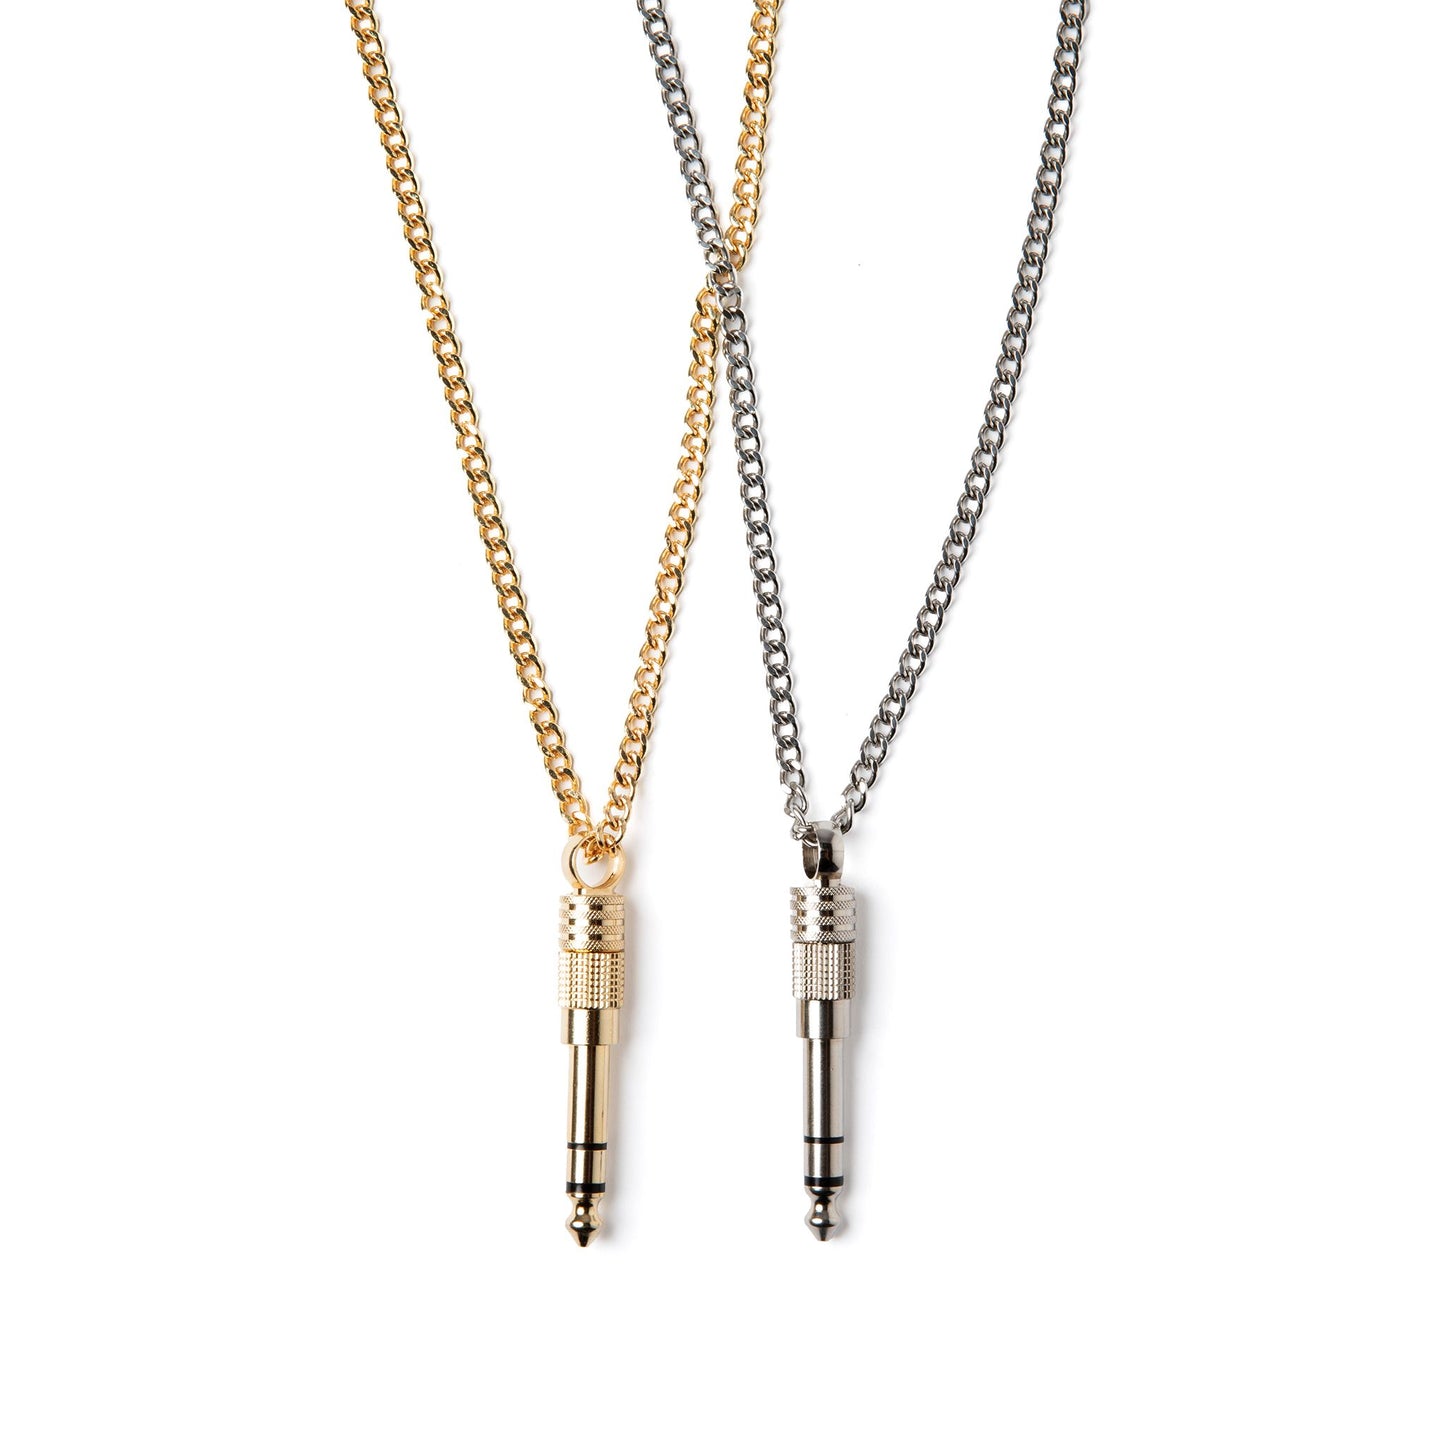 Gold & Silver DJ Necklace with 1/4" Adapter Bundle